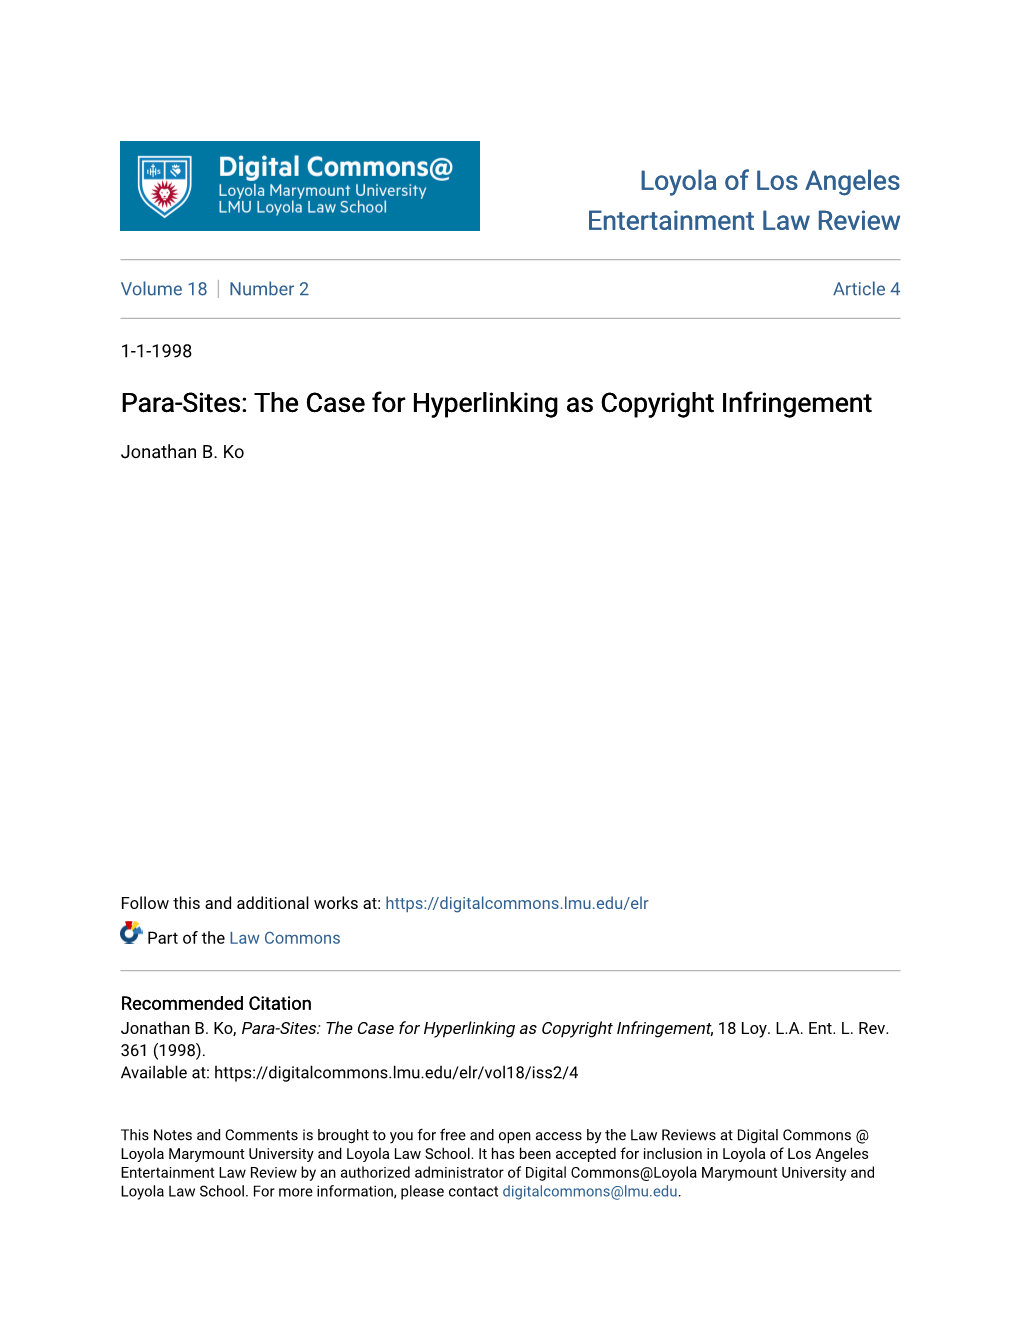 Para-Sites: the Case for Hyperlinking As Copyright Infringement